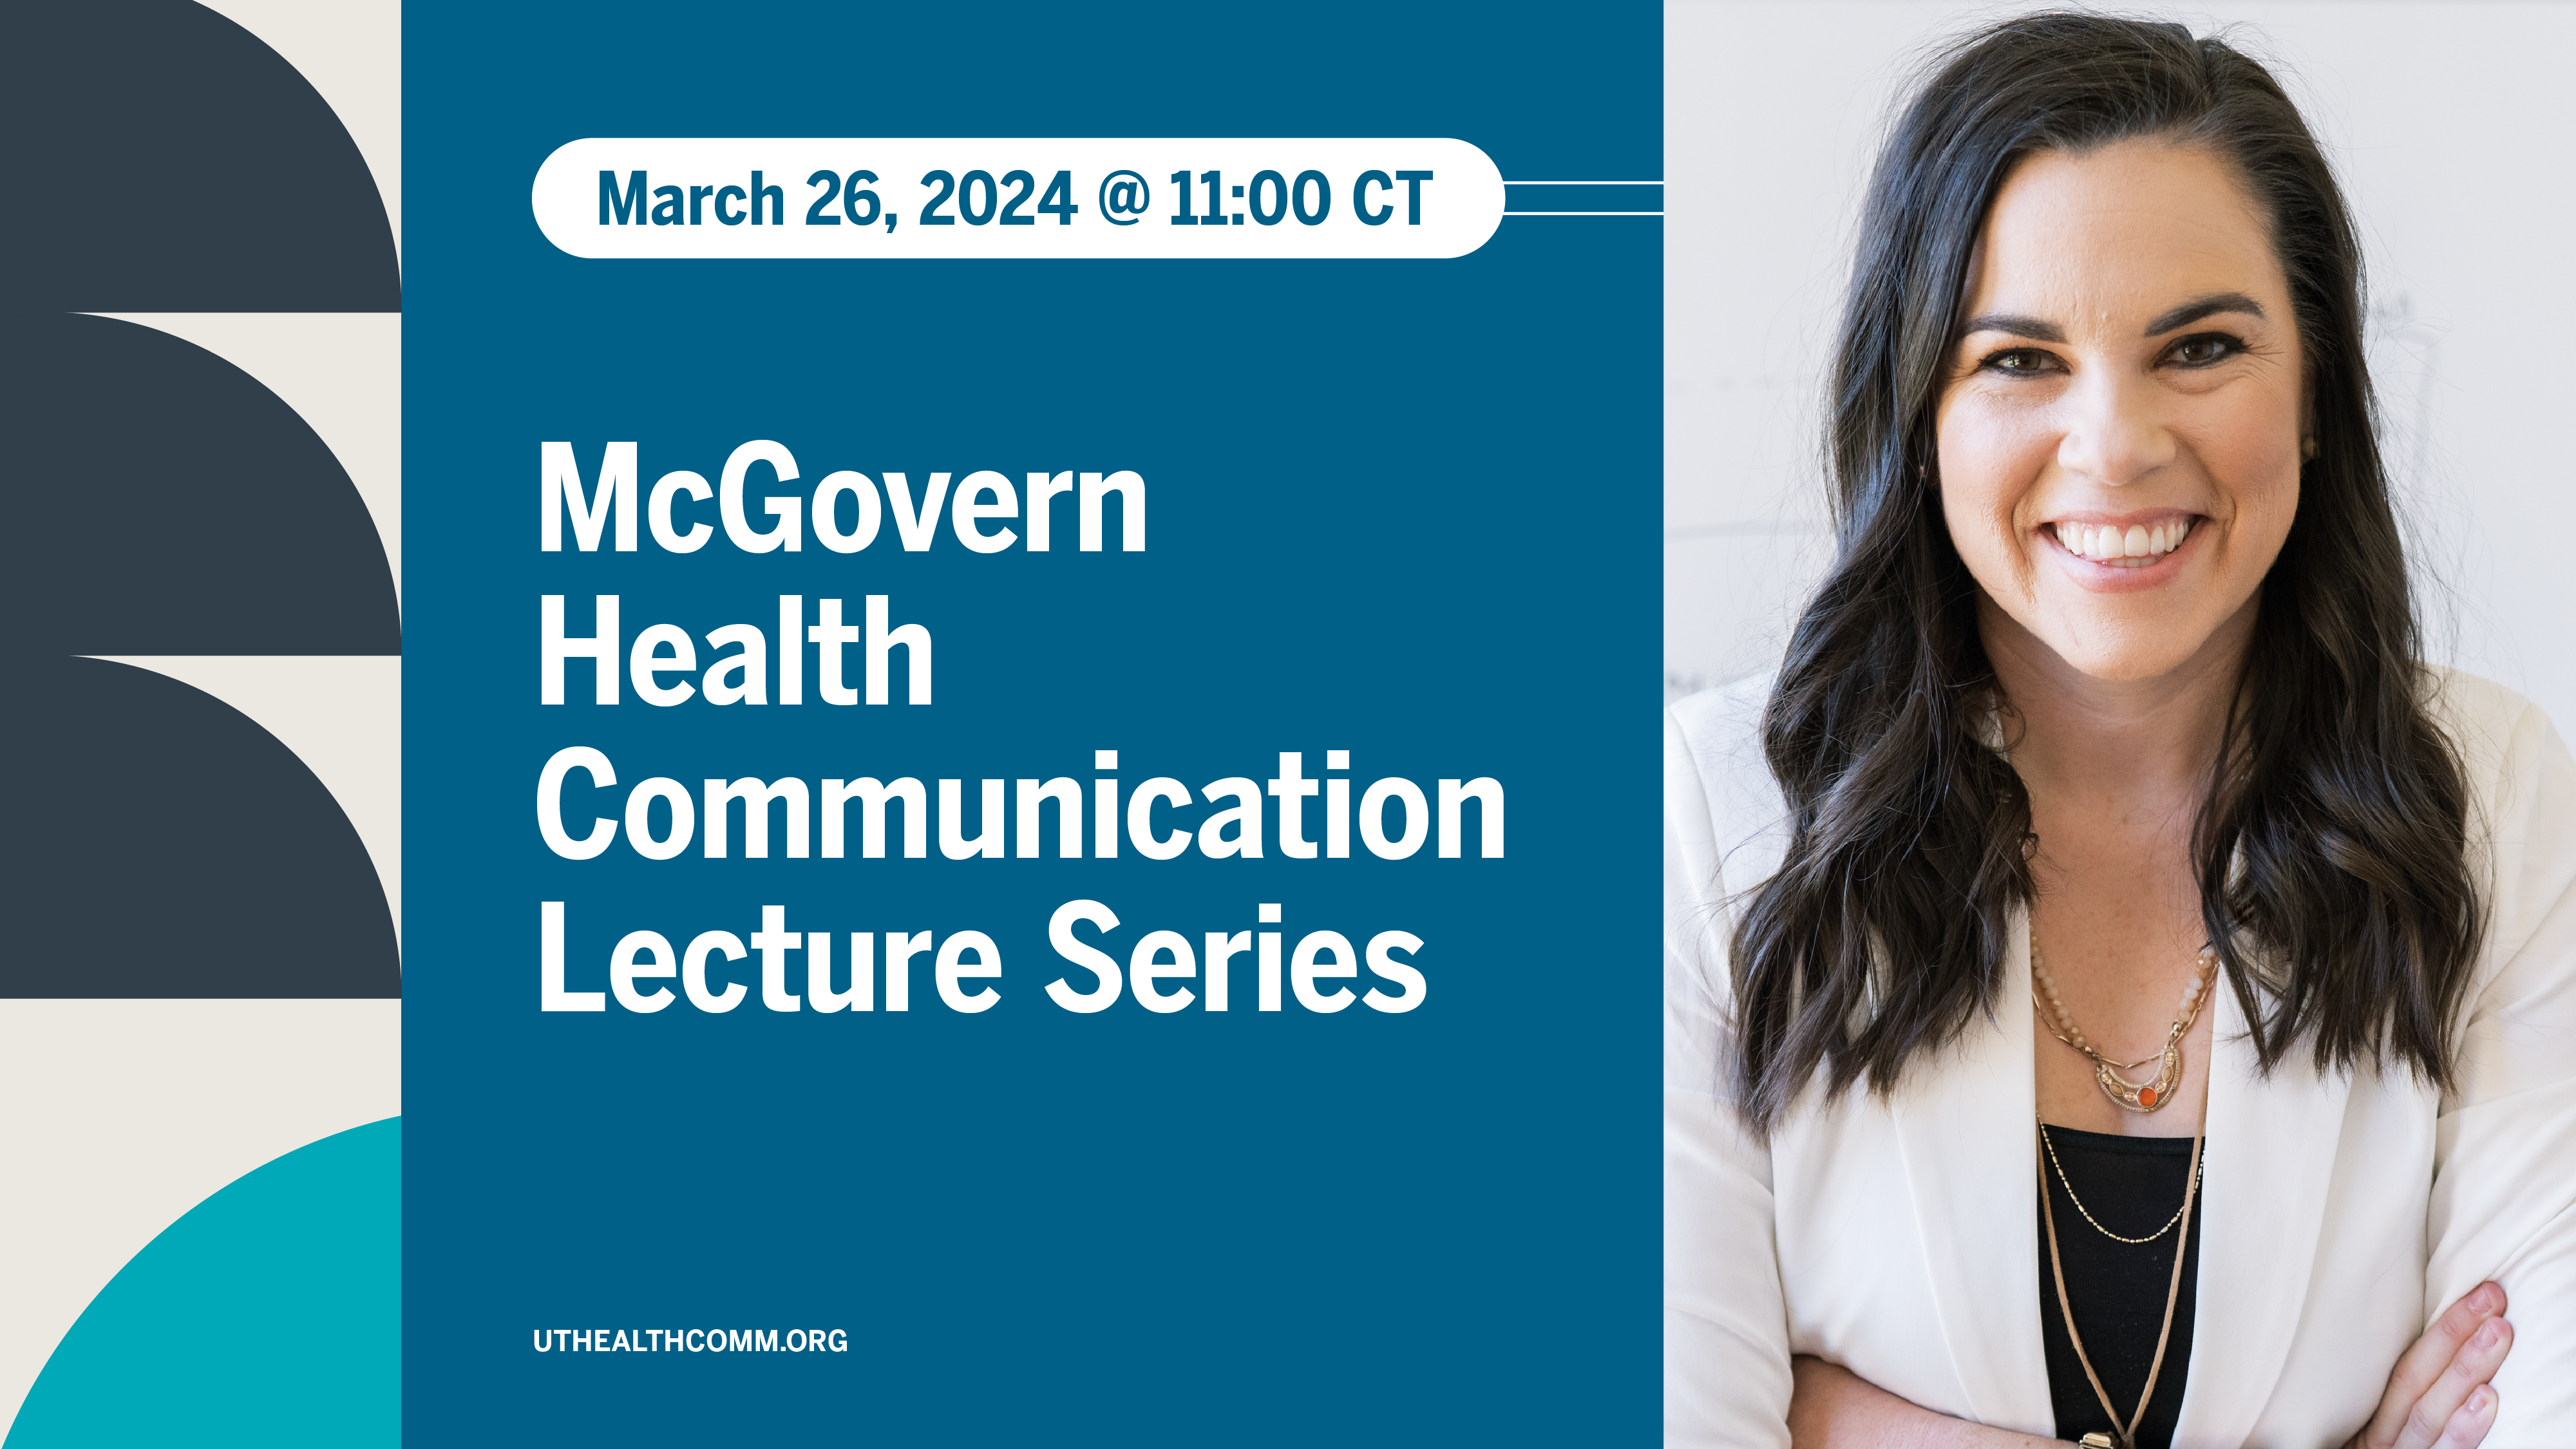 Graphic with text reading "March 26, 2024 @ 11:00 CT, McGovern Health Communication Lecture Series" and a headshot of feature speaker Dr. Katelyn Jetelina, a white woman with long dark hair in a white blazer smiling at the camera.